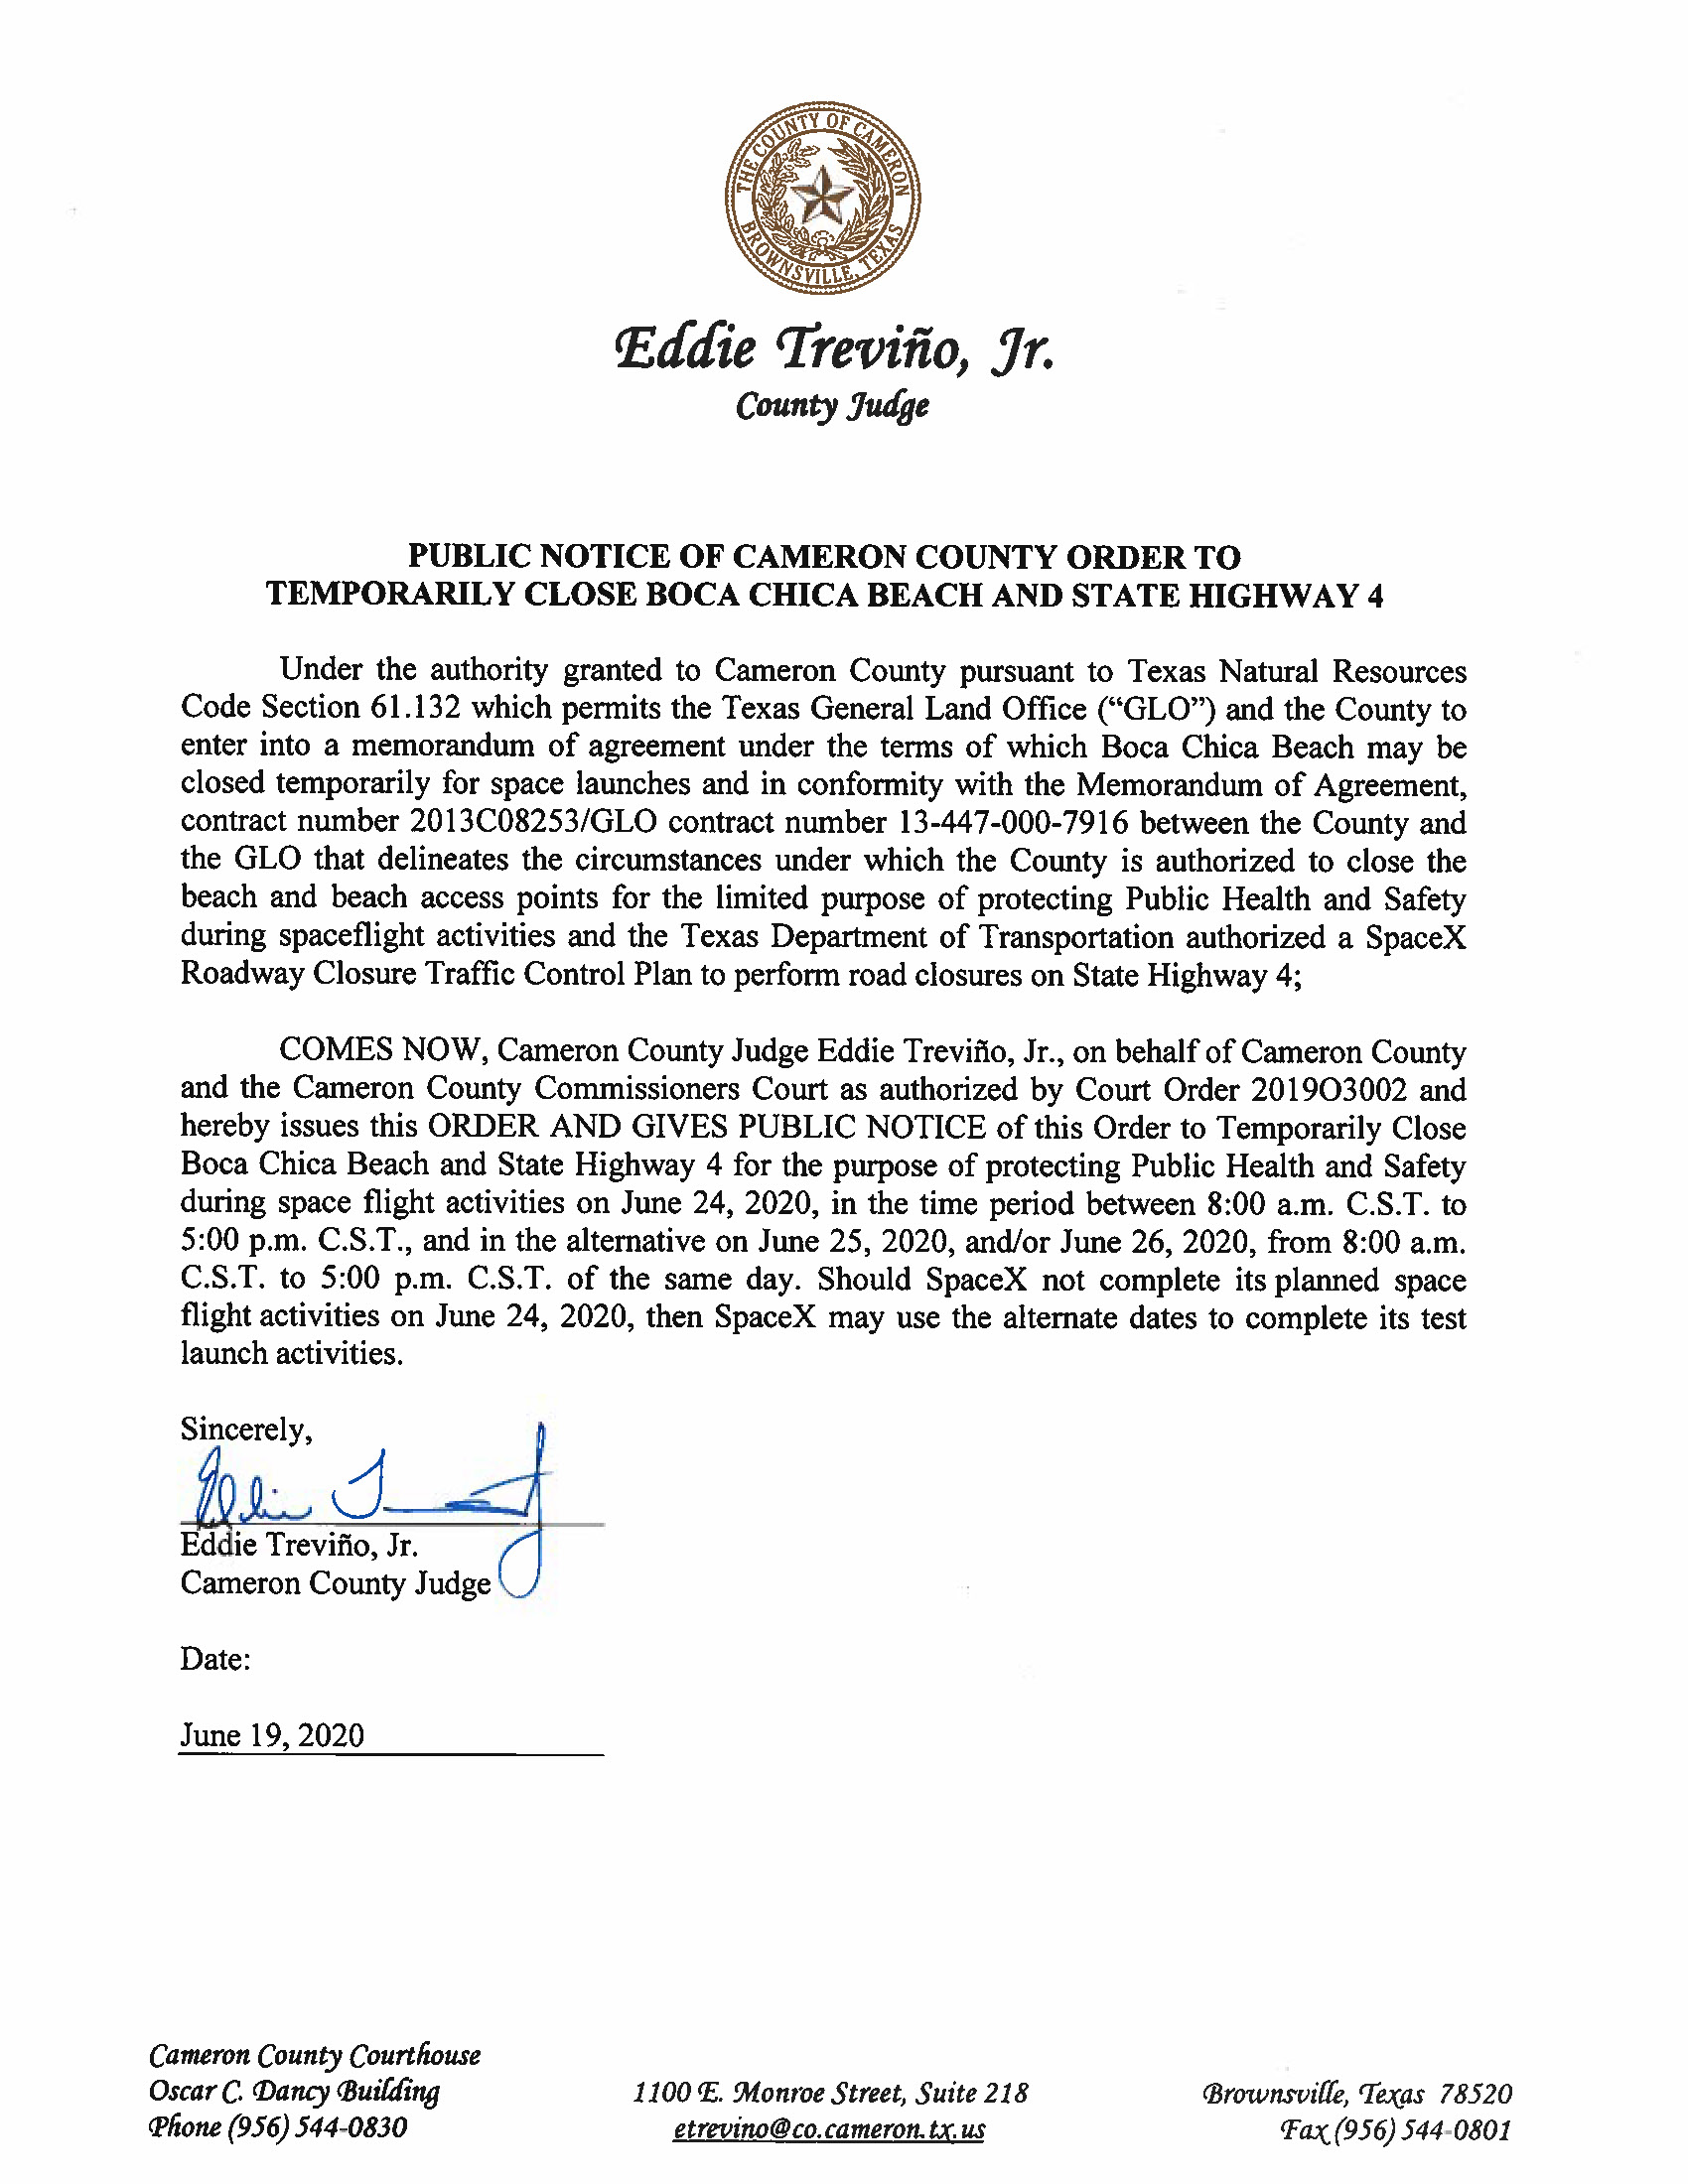 PUBLIC NOTICE OF CAMERON COUNTY ORDER TO TEMP. BEACH CLOSURE AND HWY.06.24.20 Page 1